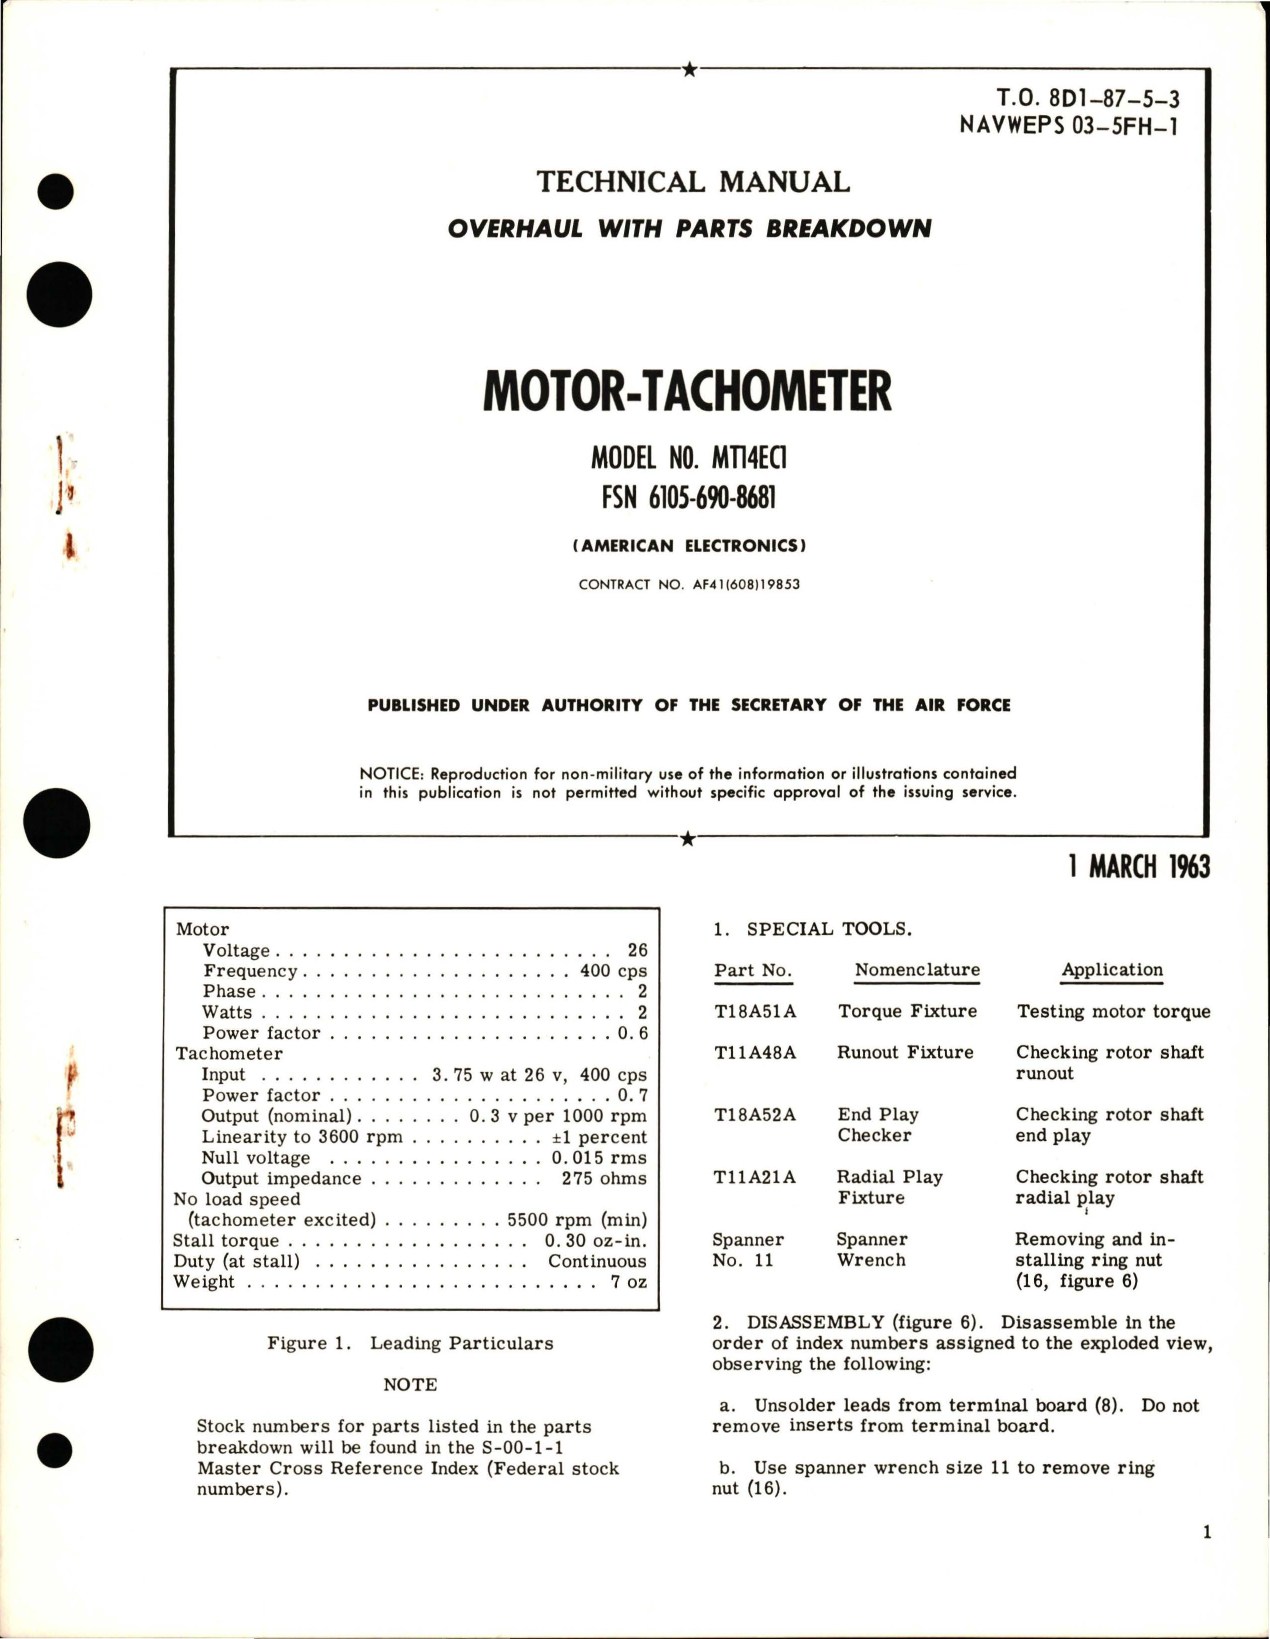 Sample page 1 from AirCorps Library document: Overhaul with Parts Breakdown for Motor-Tachometer - Model MT14EC1 